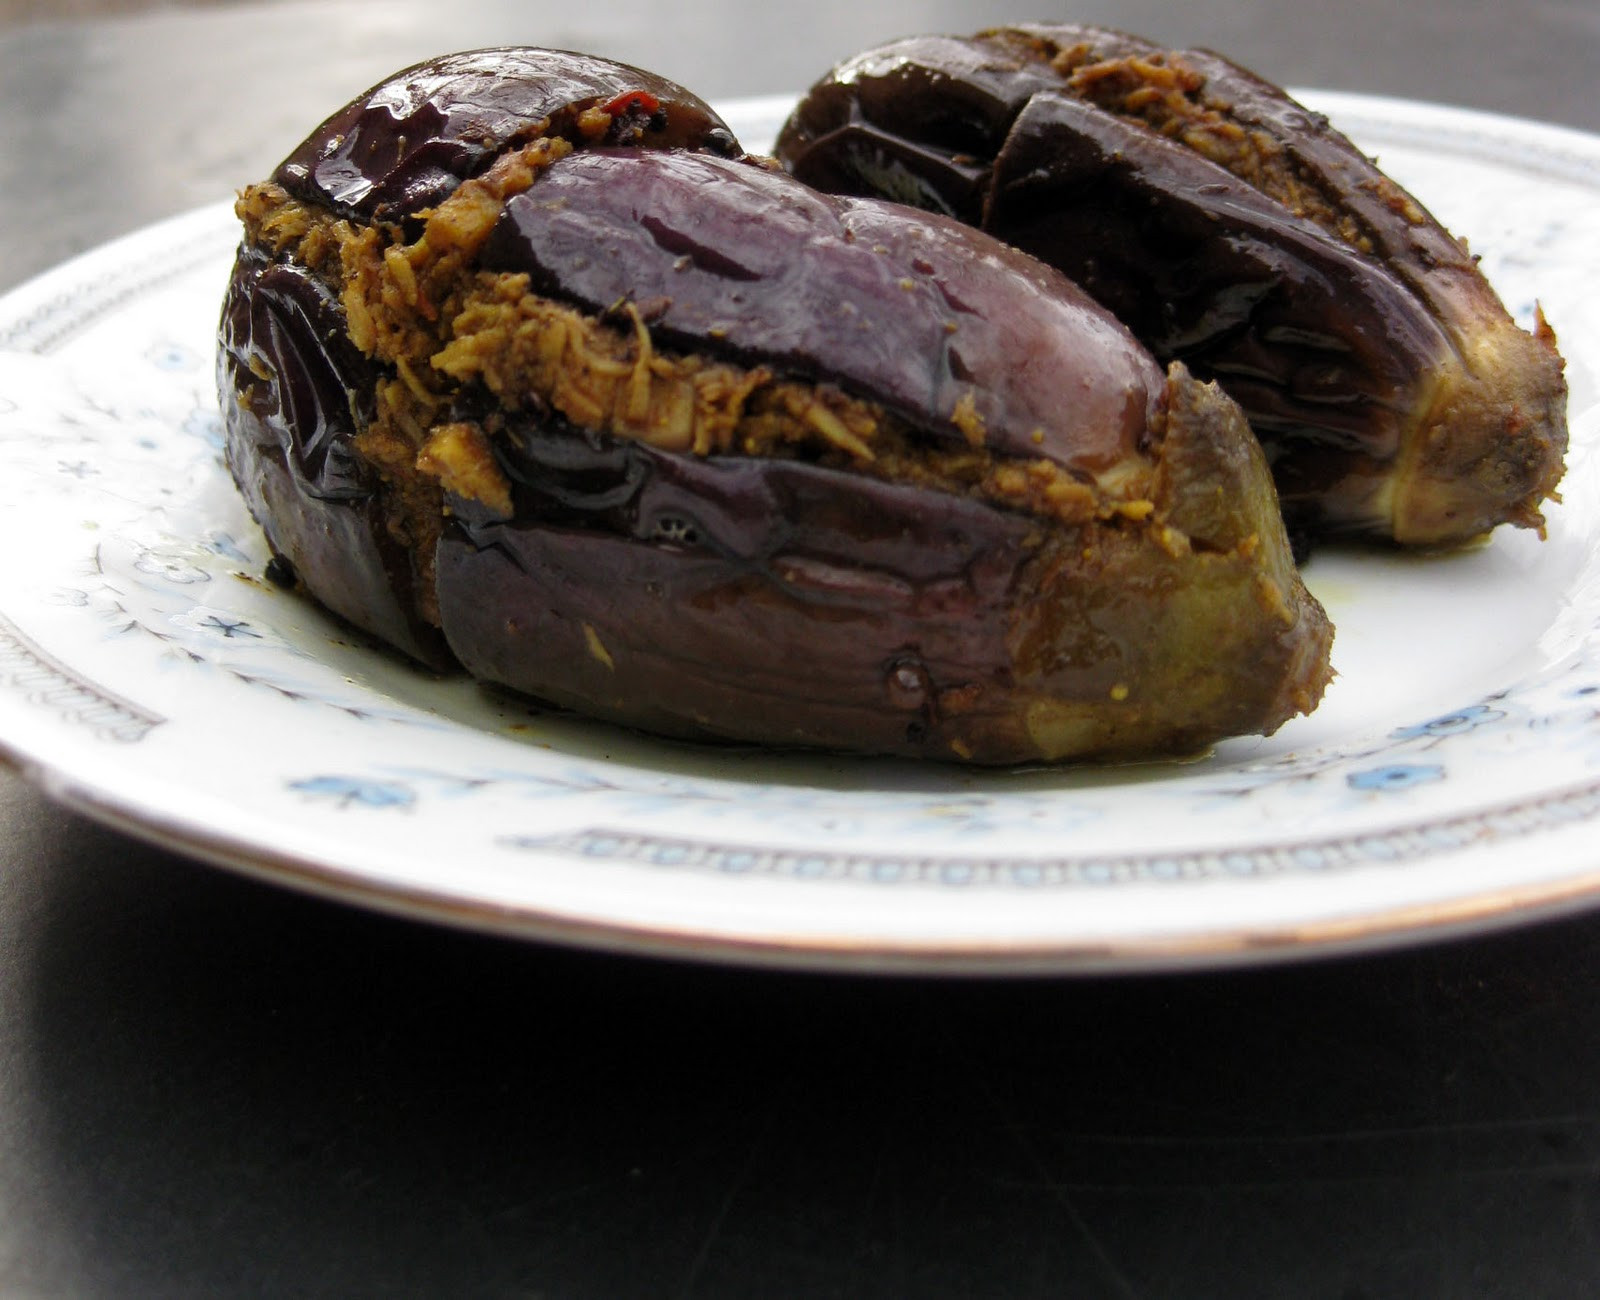 Baby Eggplant Recipes Indian
 Baby Eggplant with Indian Spices Bharvaan Baingan paleo